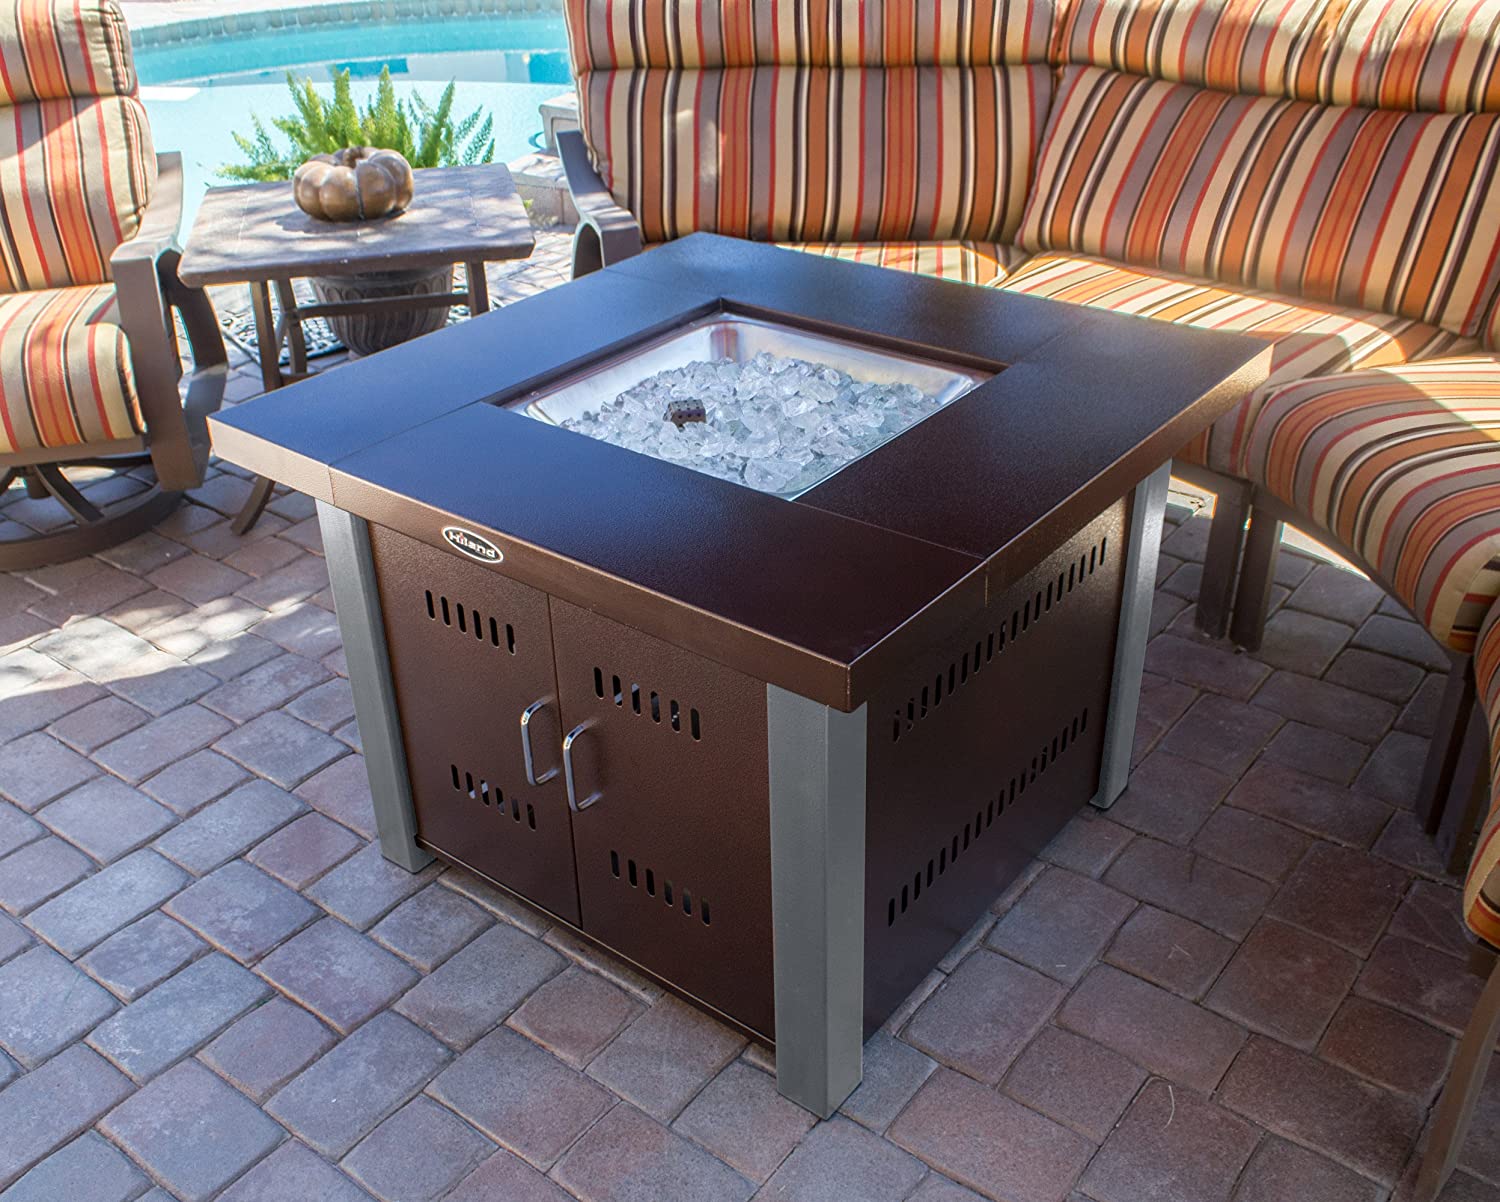 Hiland GS-F-PCSS 40,000 BT Propane Fire Pit, Large, Two Toned Hammered Bronze